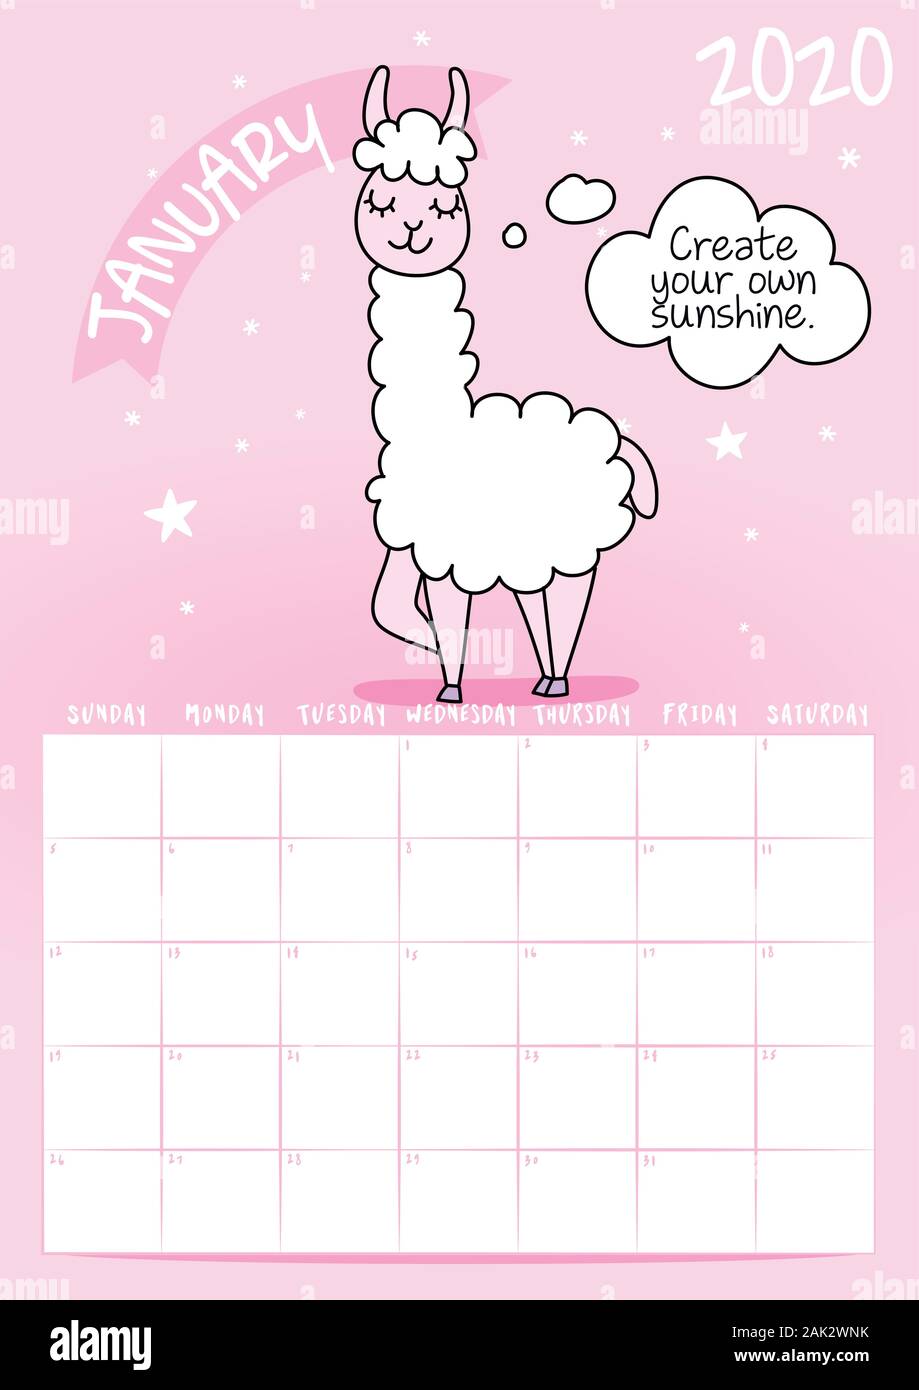 2020 January Calendar With Calligraphy Phrase And Llama Doodle